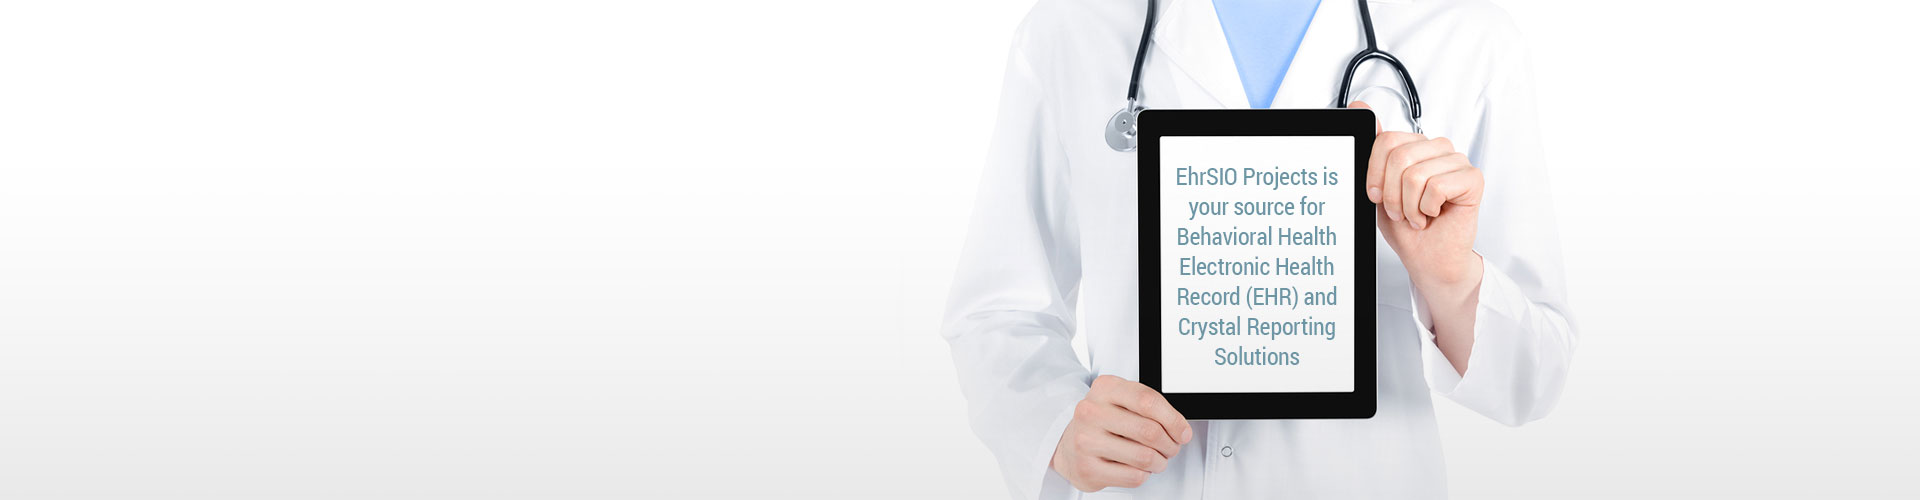 ehrSIO Offers Behavioral Electronic Health Record (EHR) Solutions